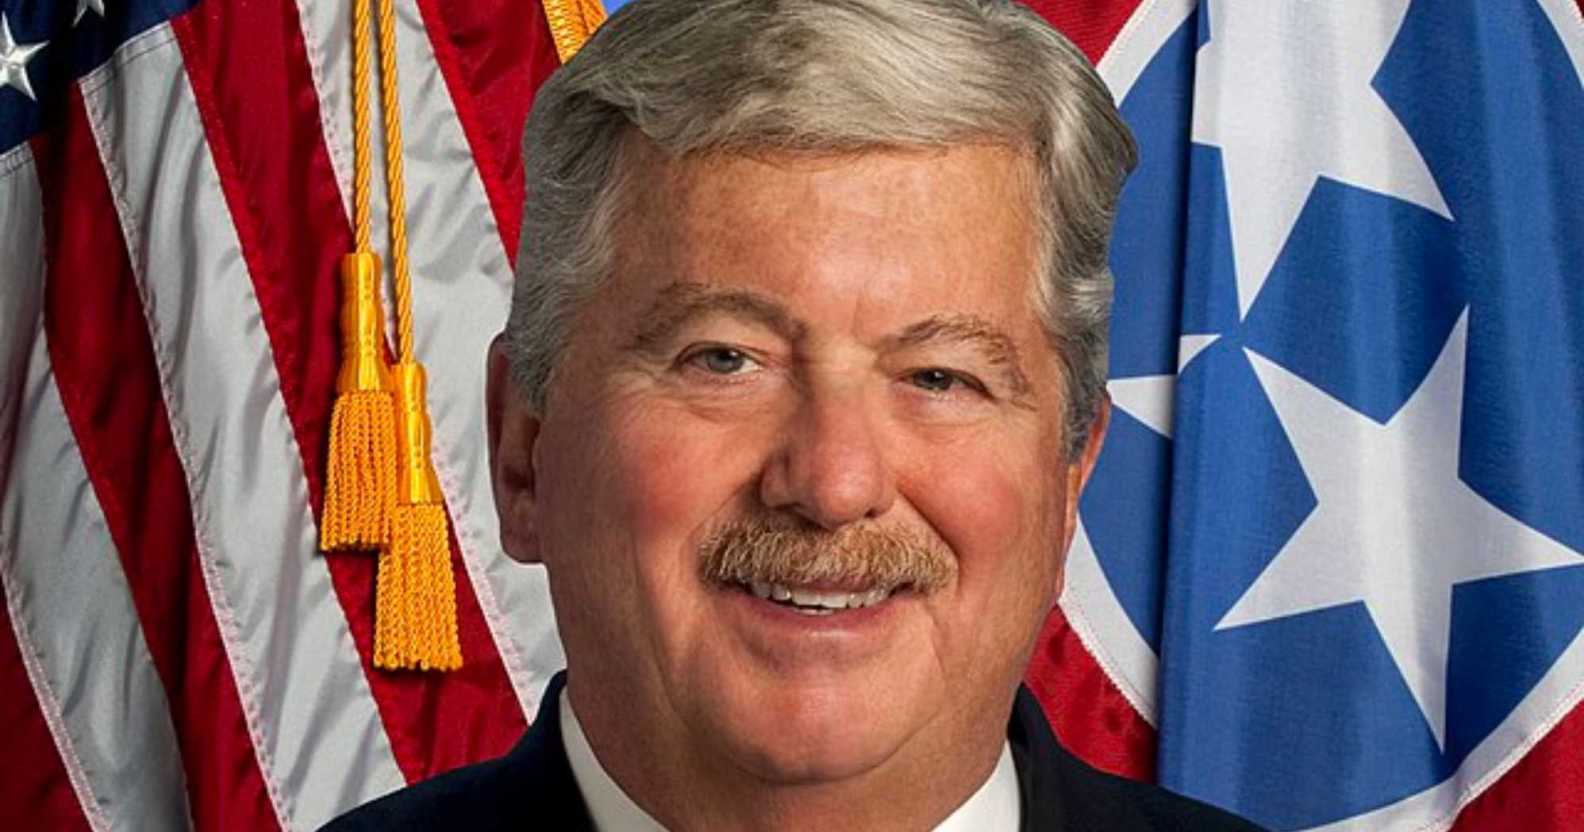 Anti-LGBTQ+ Tennessee governor Randy McNally was caught commenting on gay man’s racy Instagram photos.